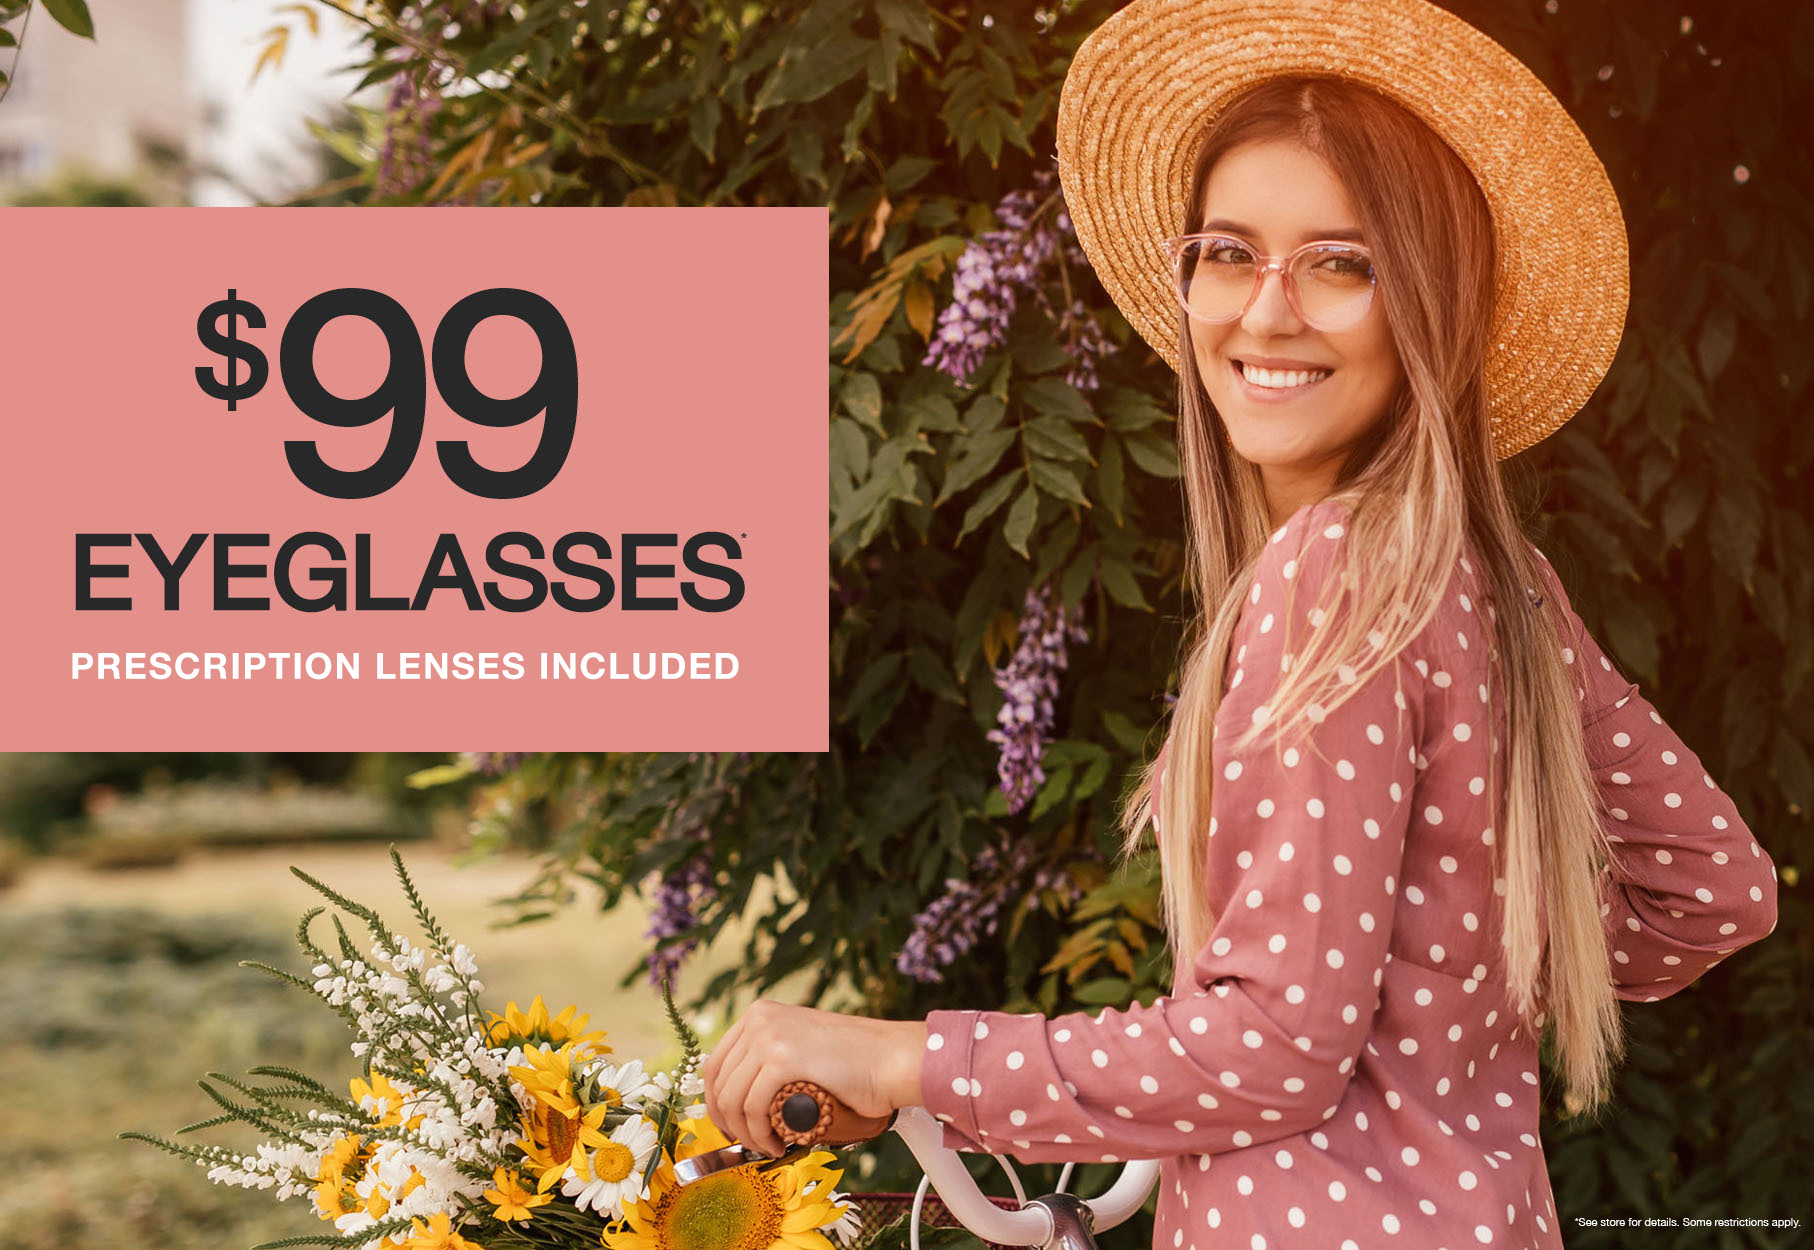 Text: $99 eyeglasses* prescription lenses included *See store for details. Some restrictions apply. Photo: Girl in a polkadot dress ridding a bike wearing eyeglasses and a hate.